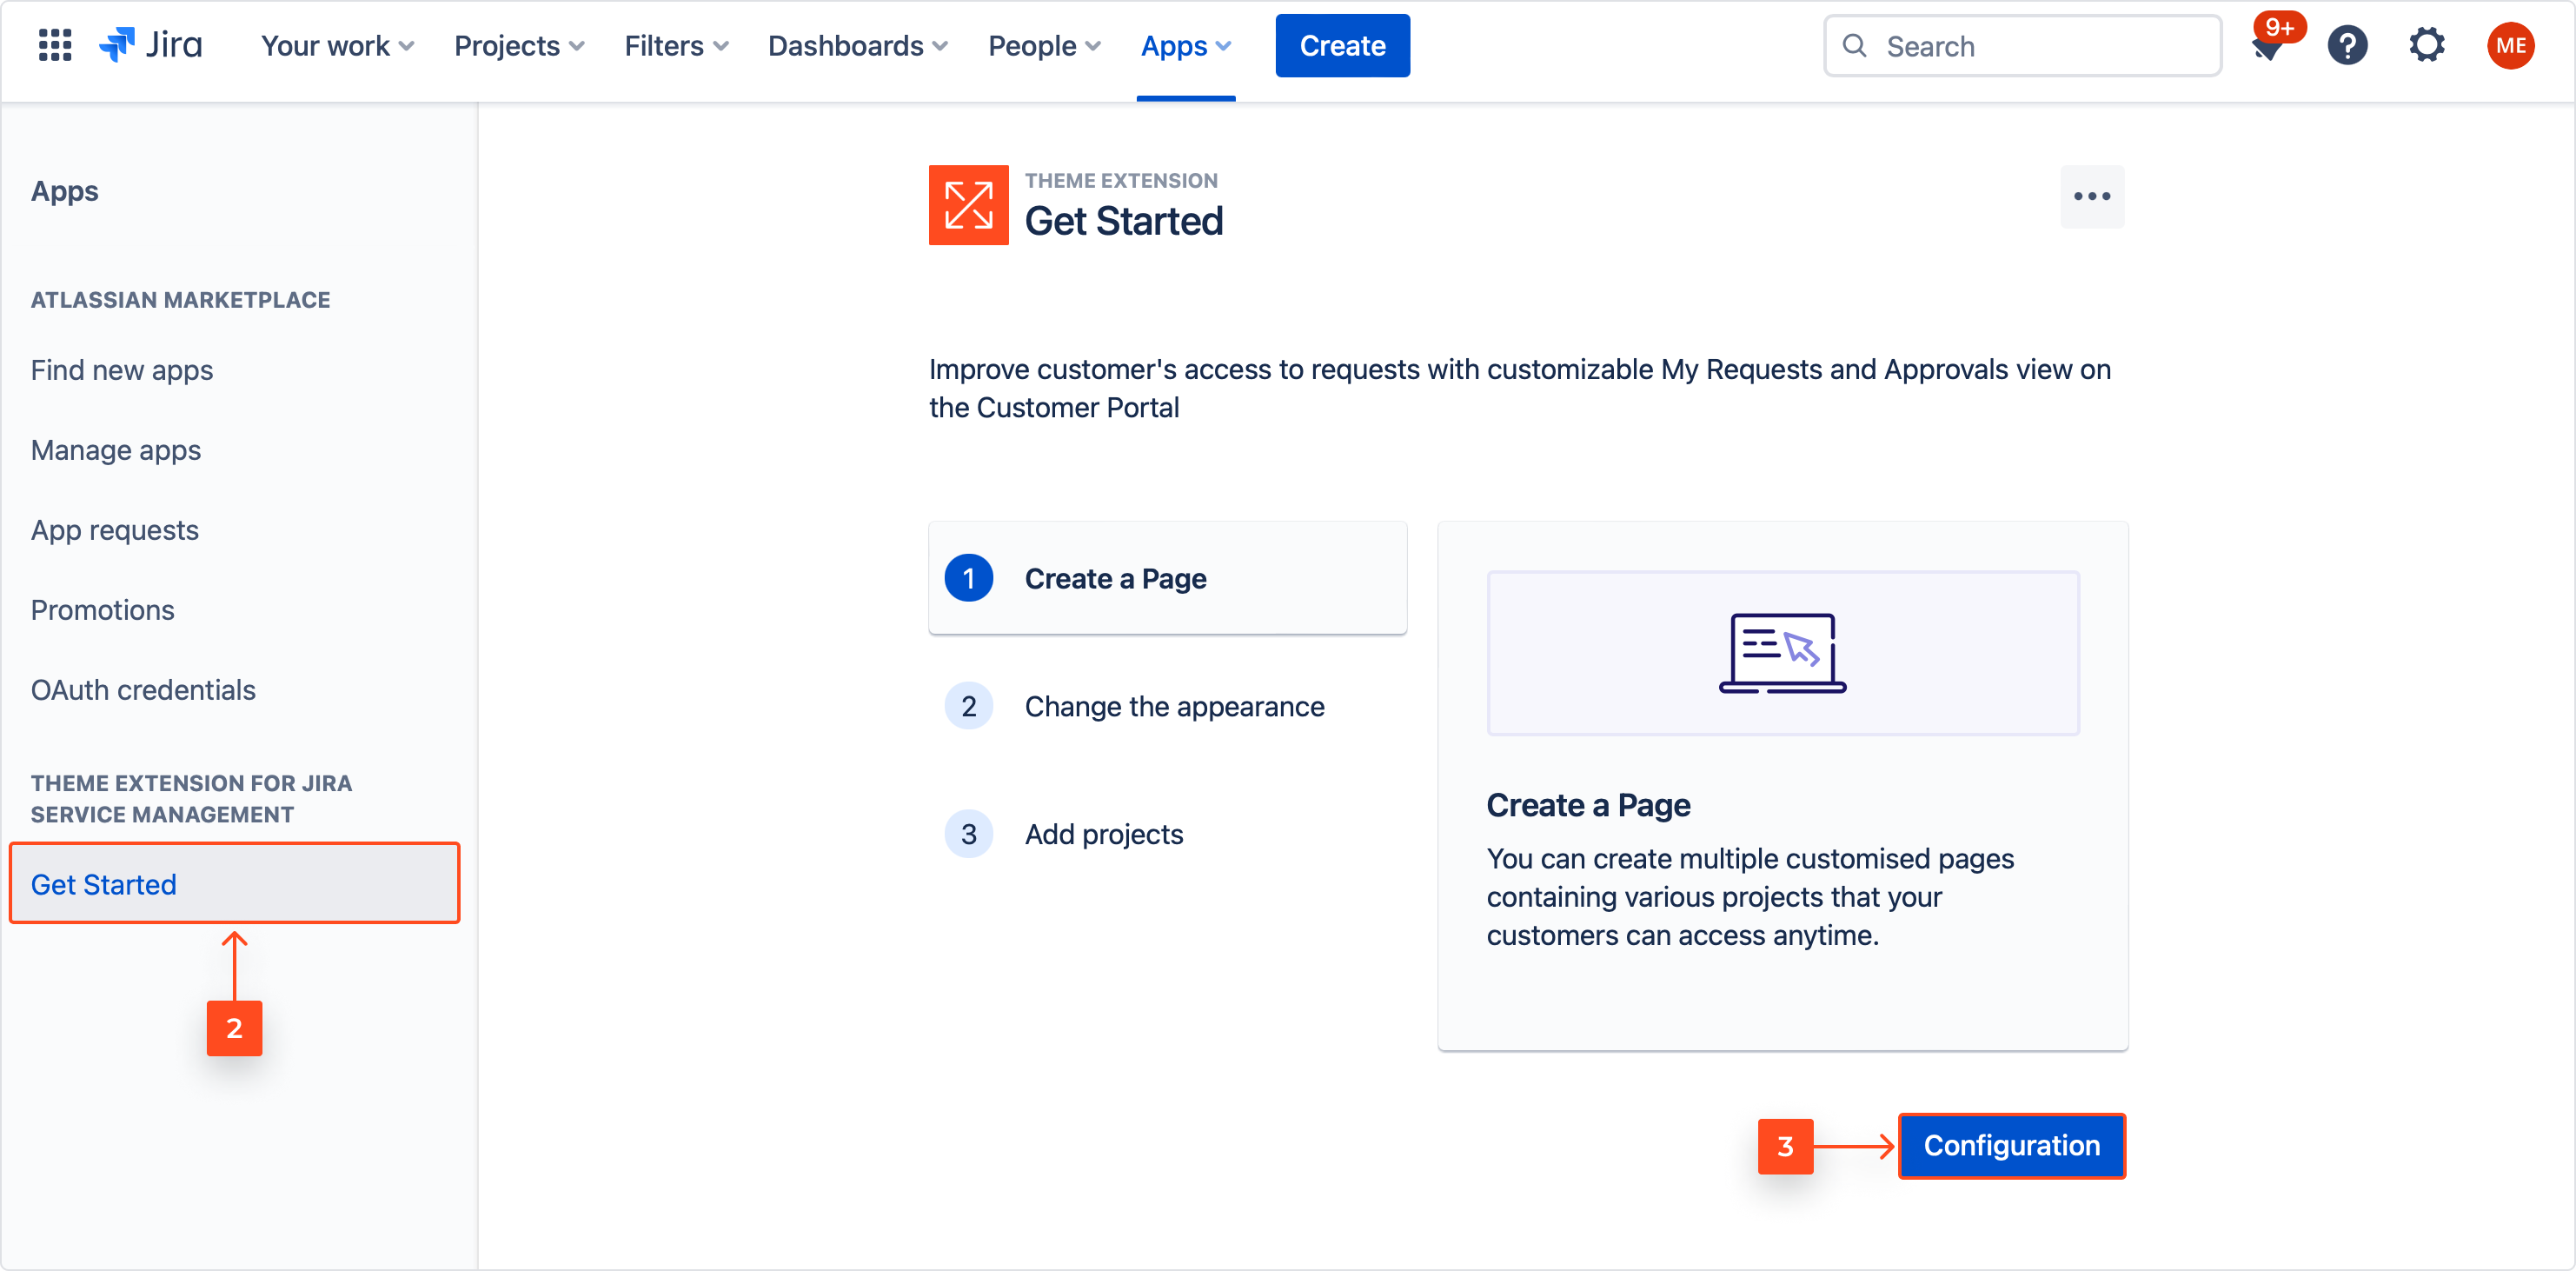 Theme Extension for Jira Service Management - Get started